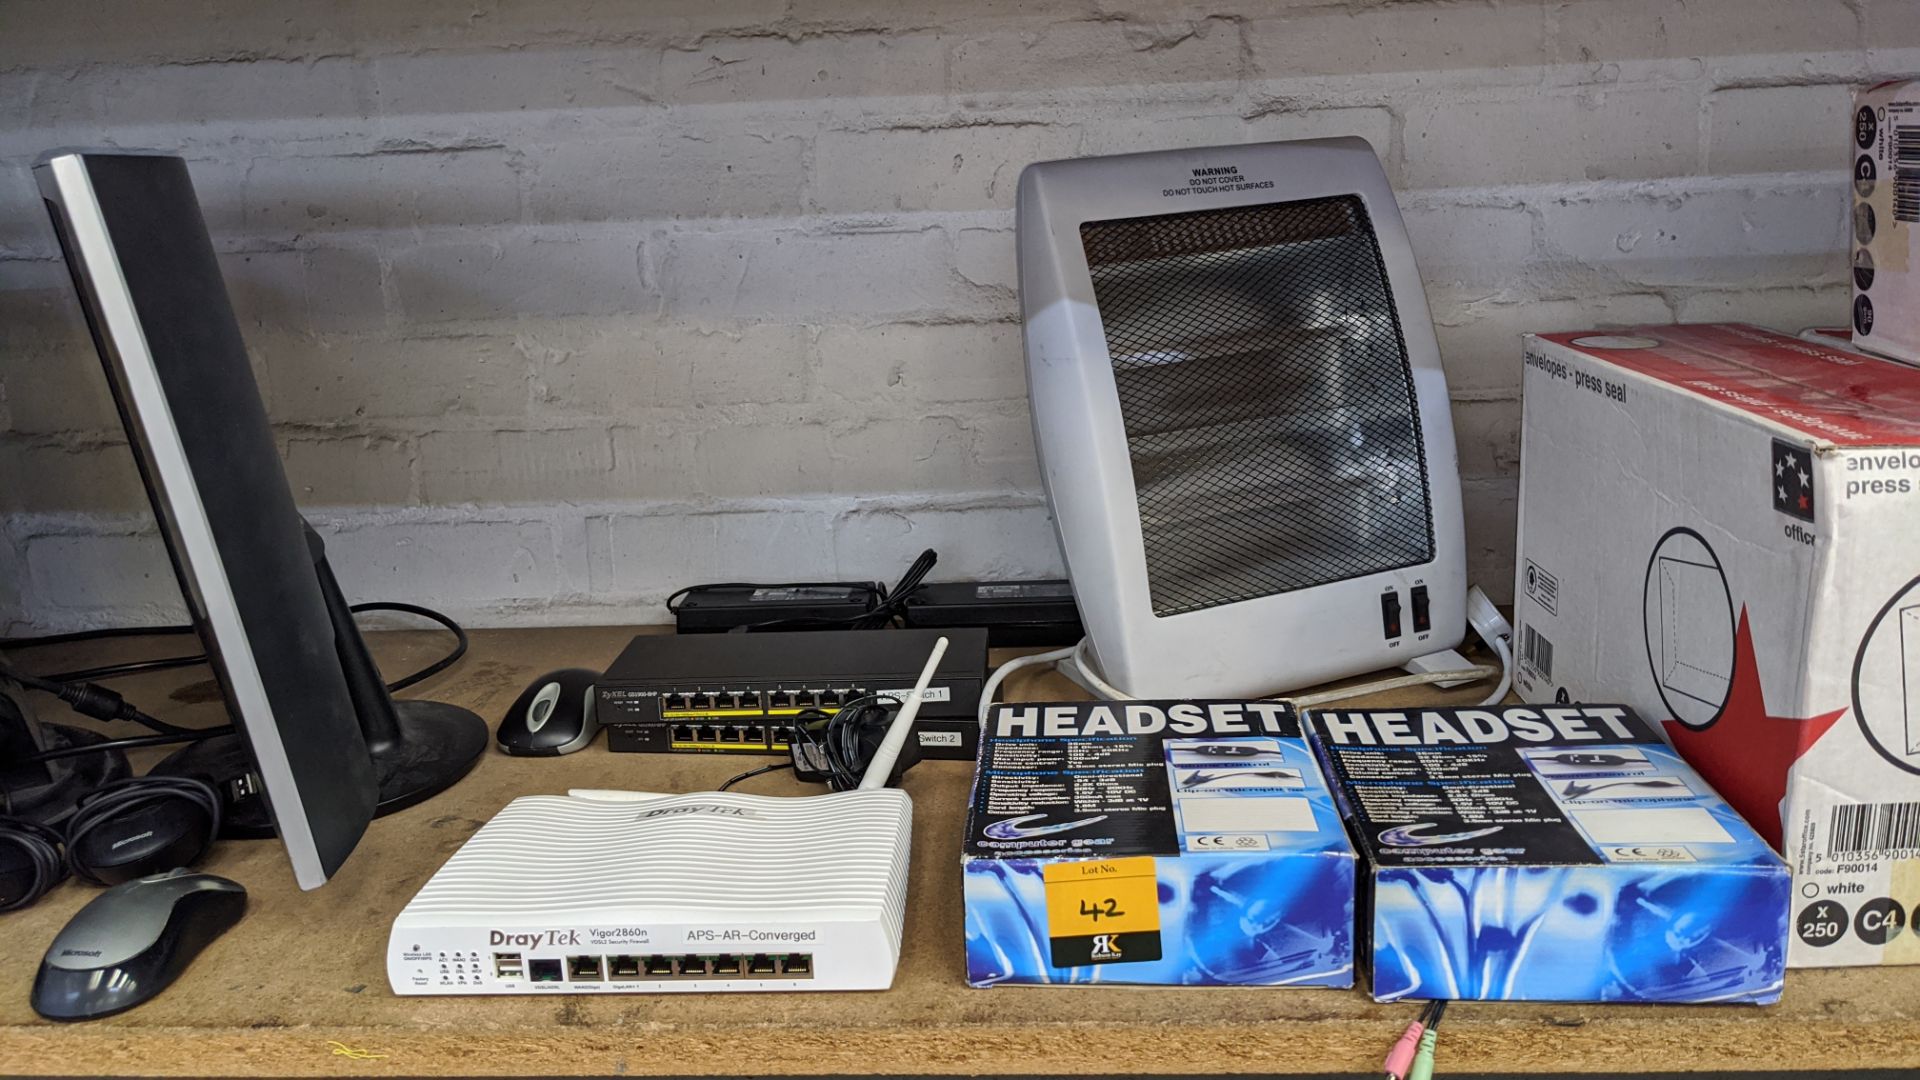 Contents of 2 shelves of assorted IT equipment including desktop computers, notebook computers, - Image 11 of 18